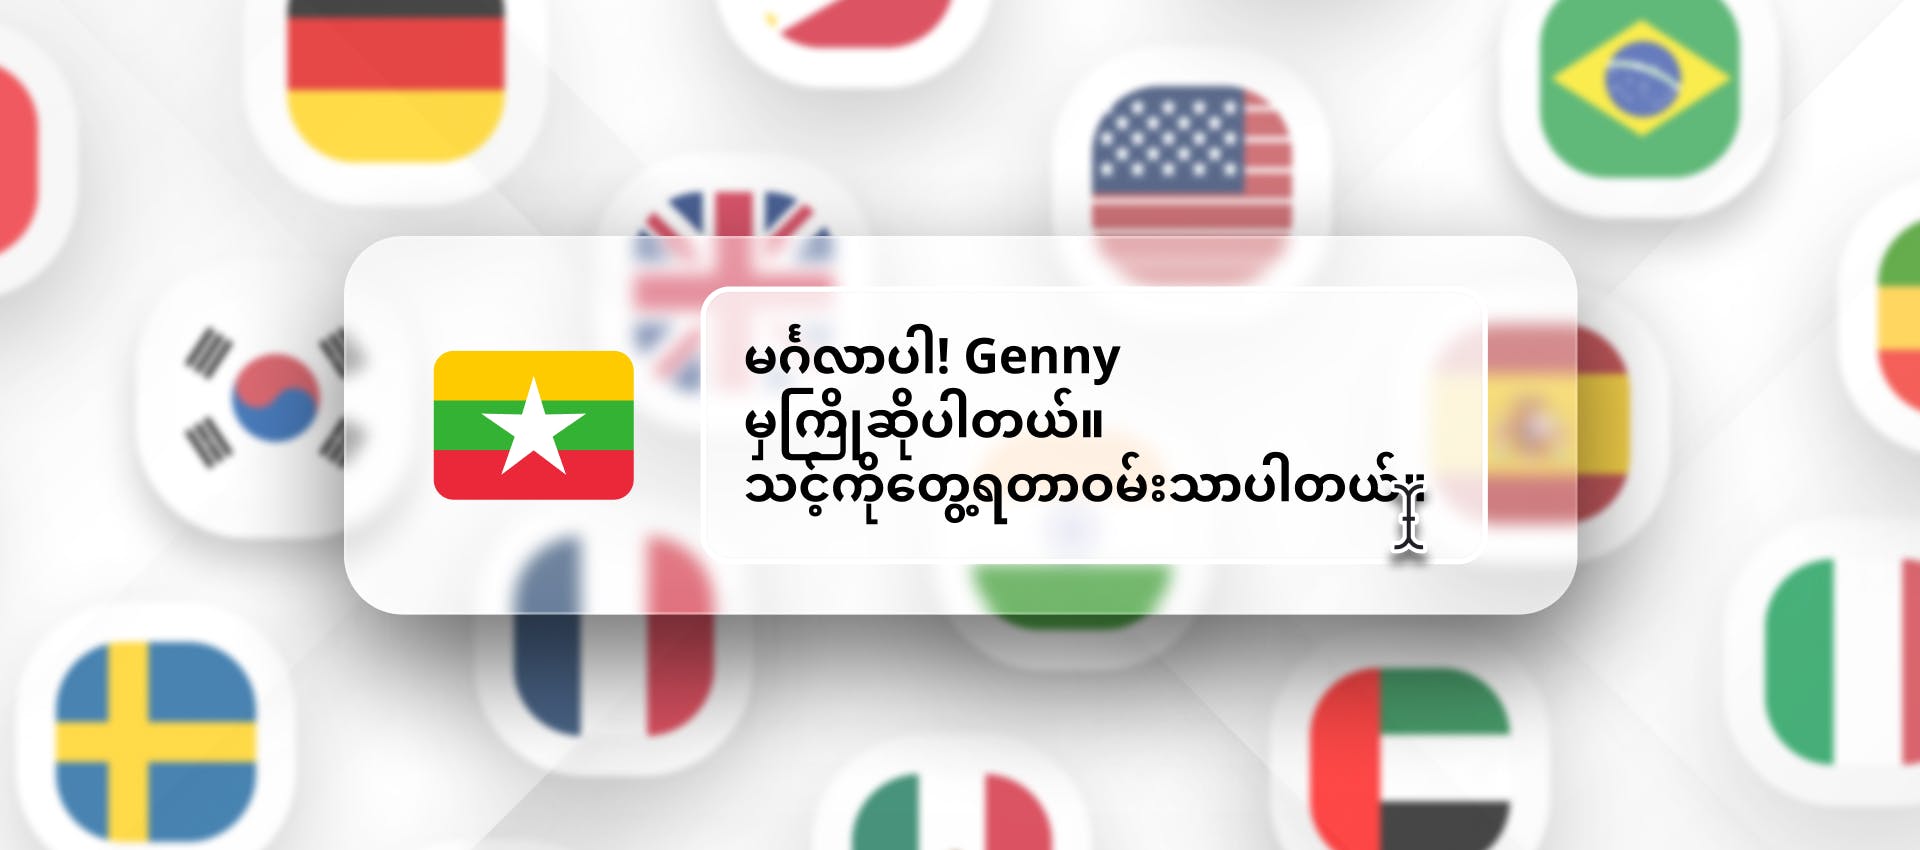 Burmese phrase for Burmese TTS generation with different flags in the background